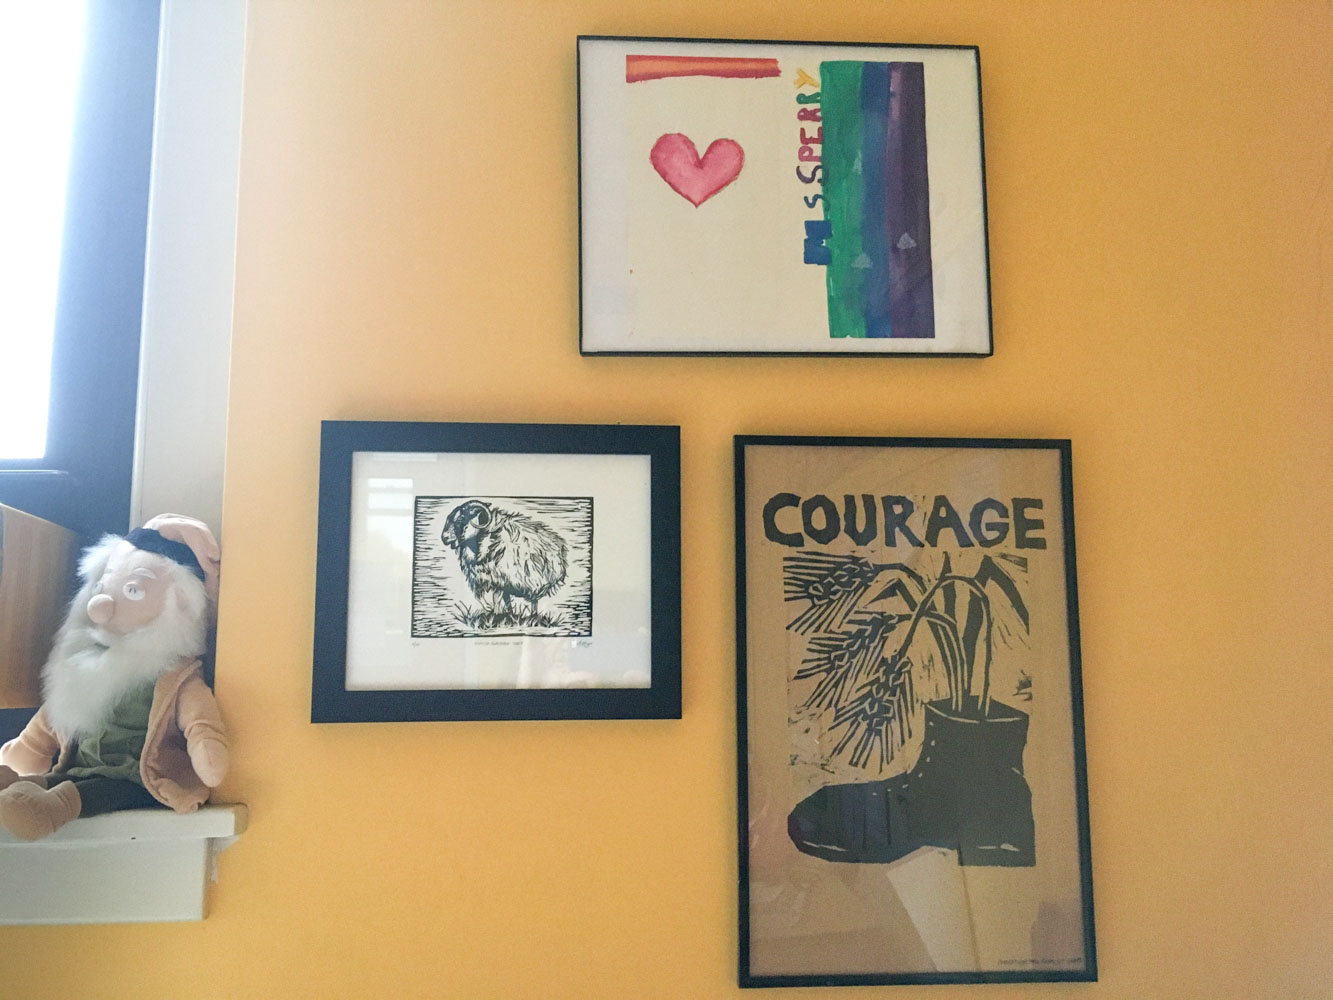 A sheep print within a black frame, hanging on a yellow wall next to two other pieces of artwork.